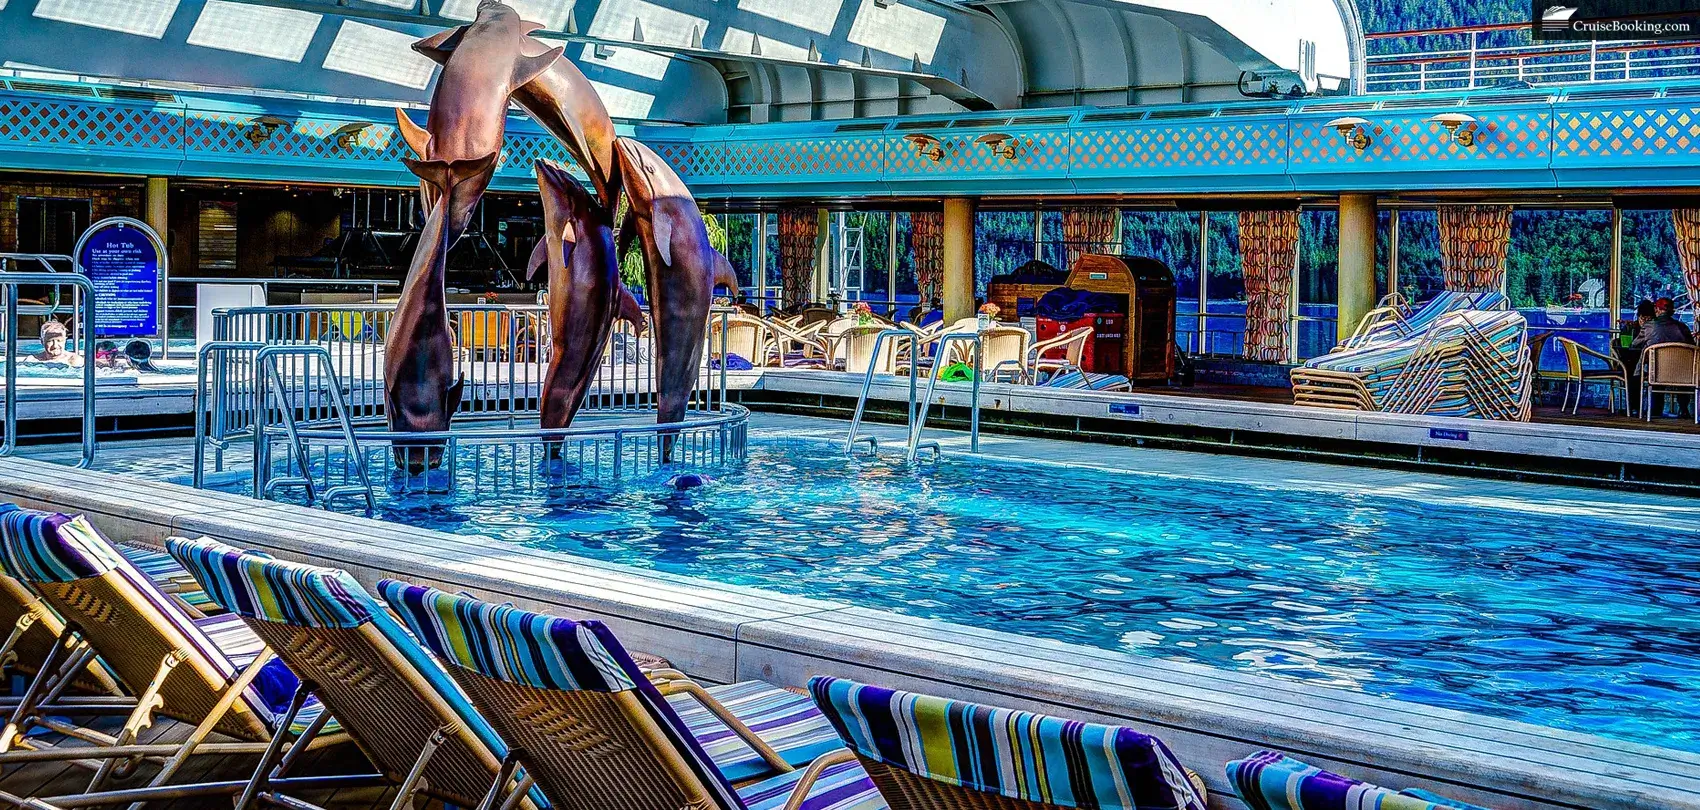 The deck of the ship's pool on a river cruise ship